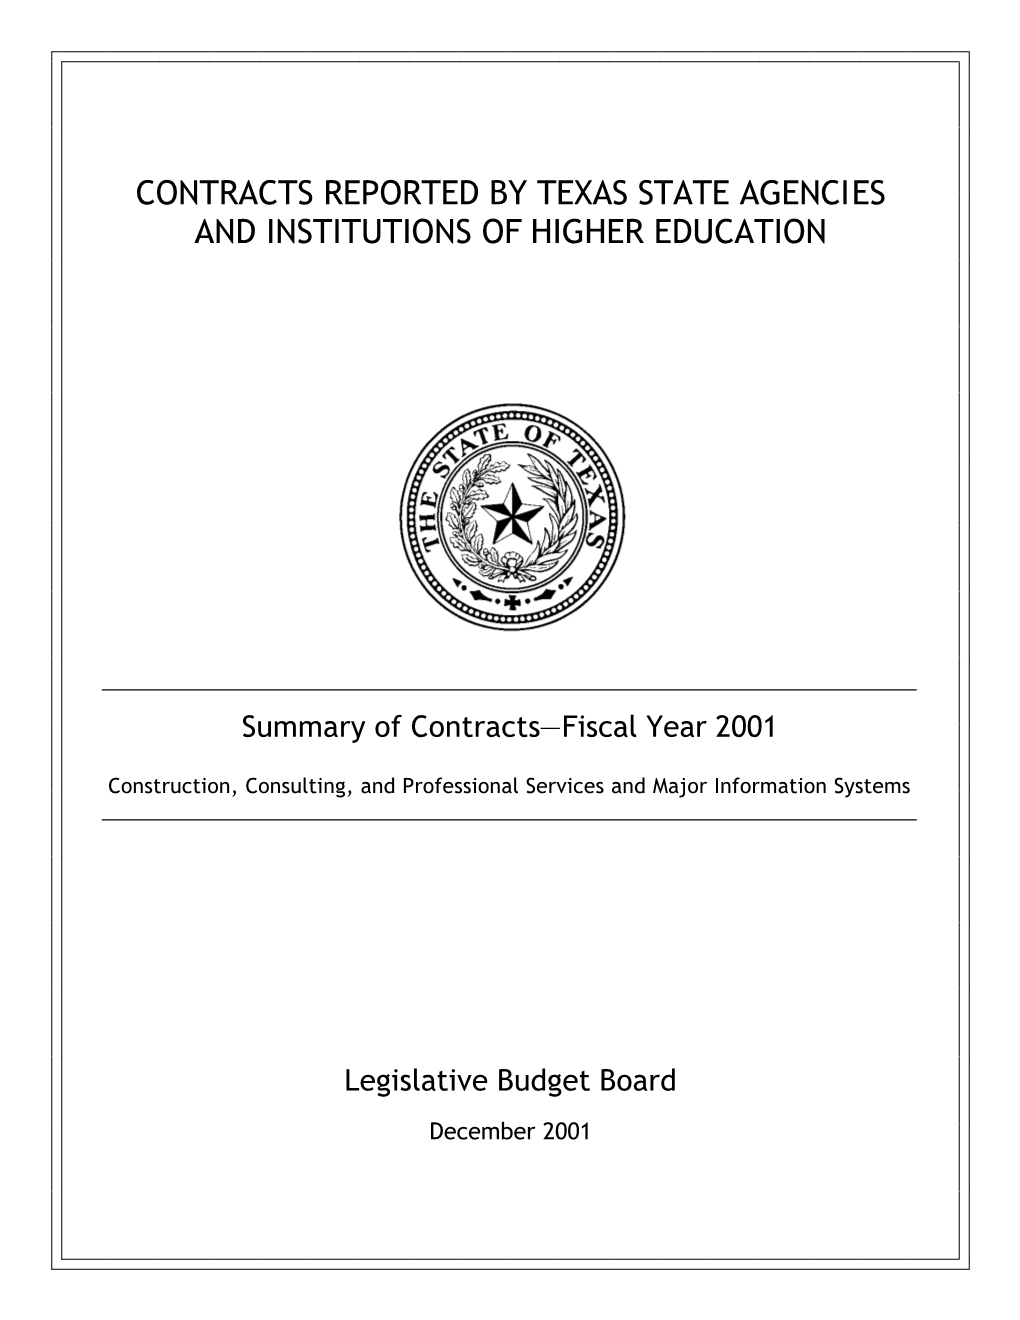 Contracts Reported by Texas State Agencies and Institutions of Higher Education